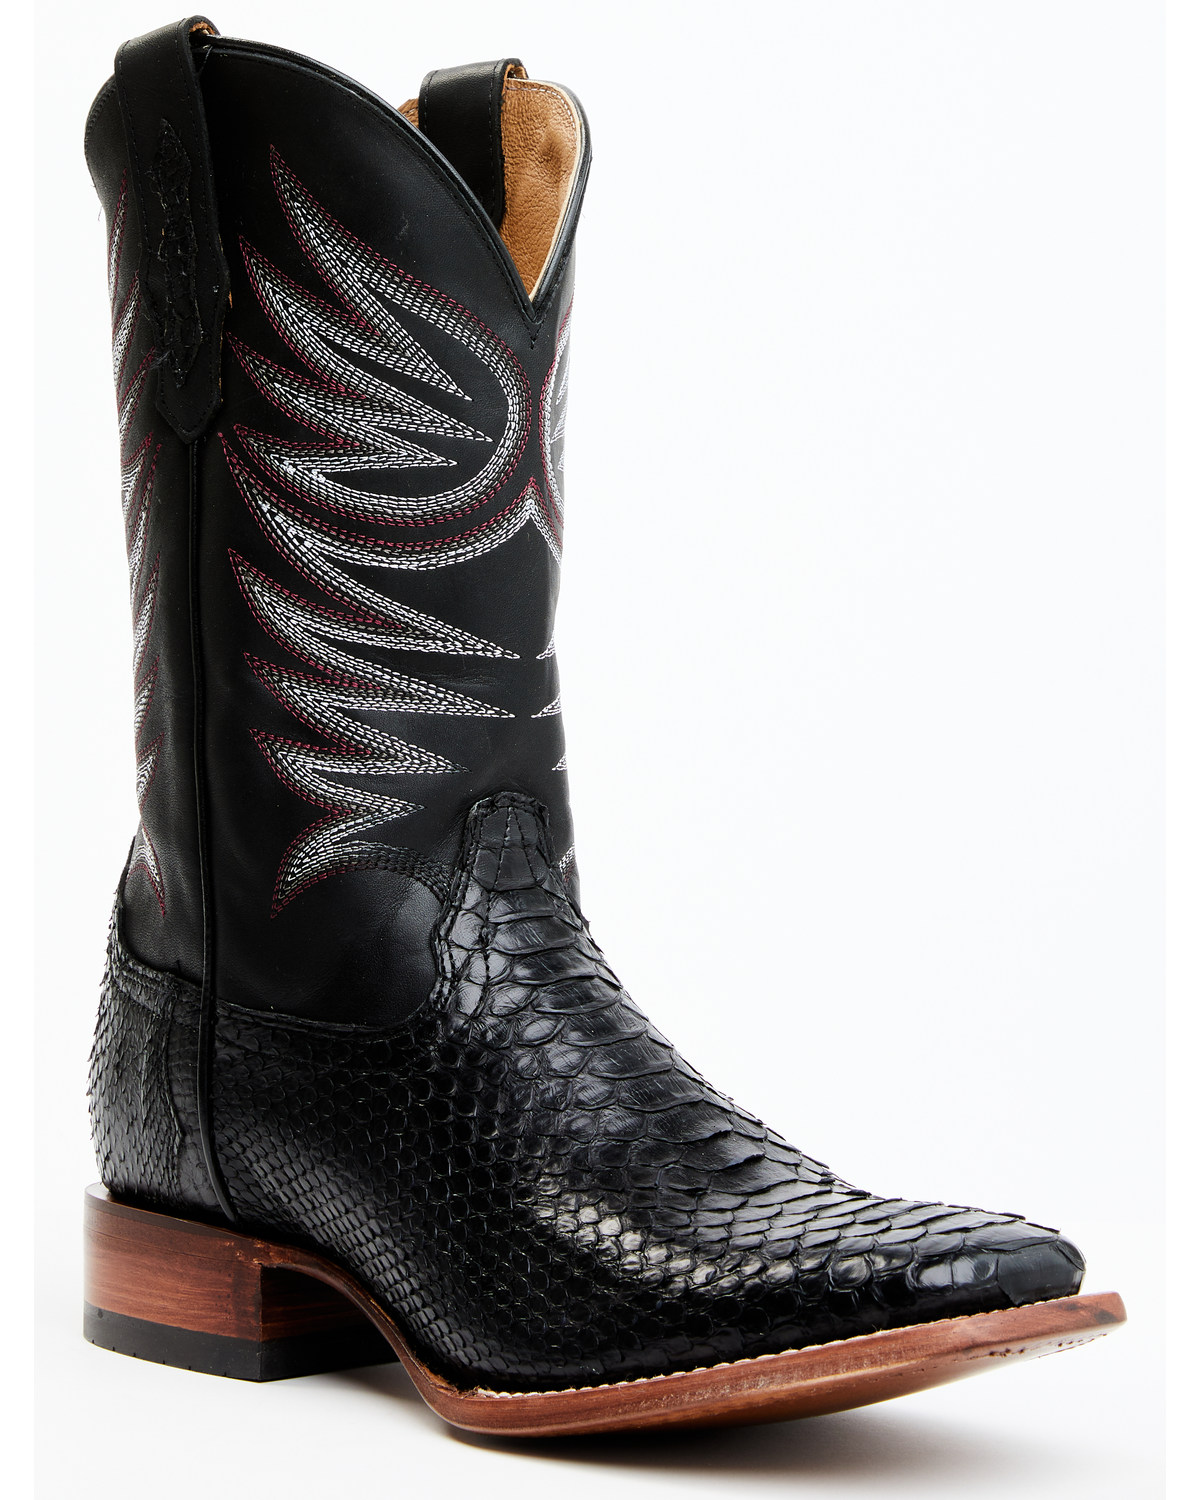 Cody James Men's Matte Python Exotic Western Boots - Broad Square Toe